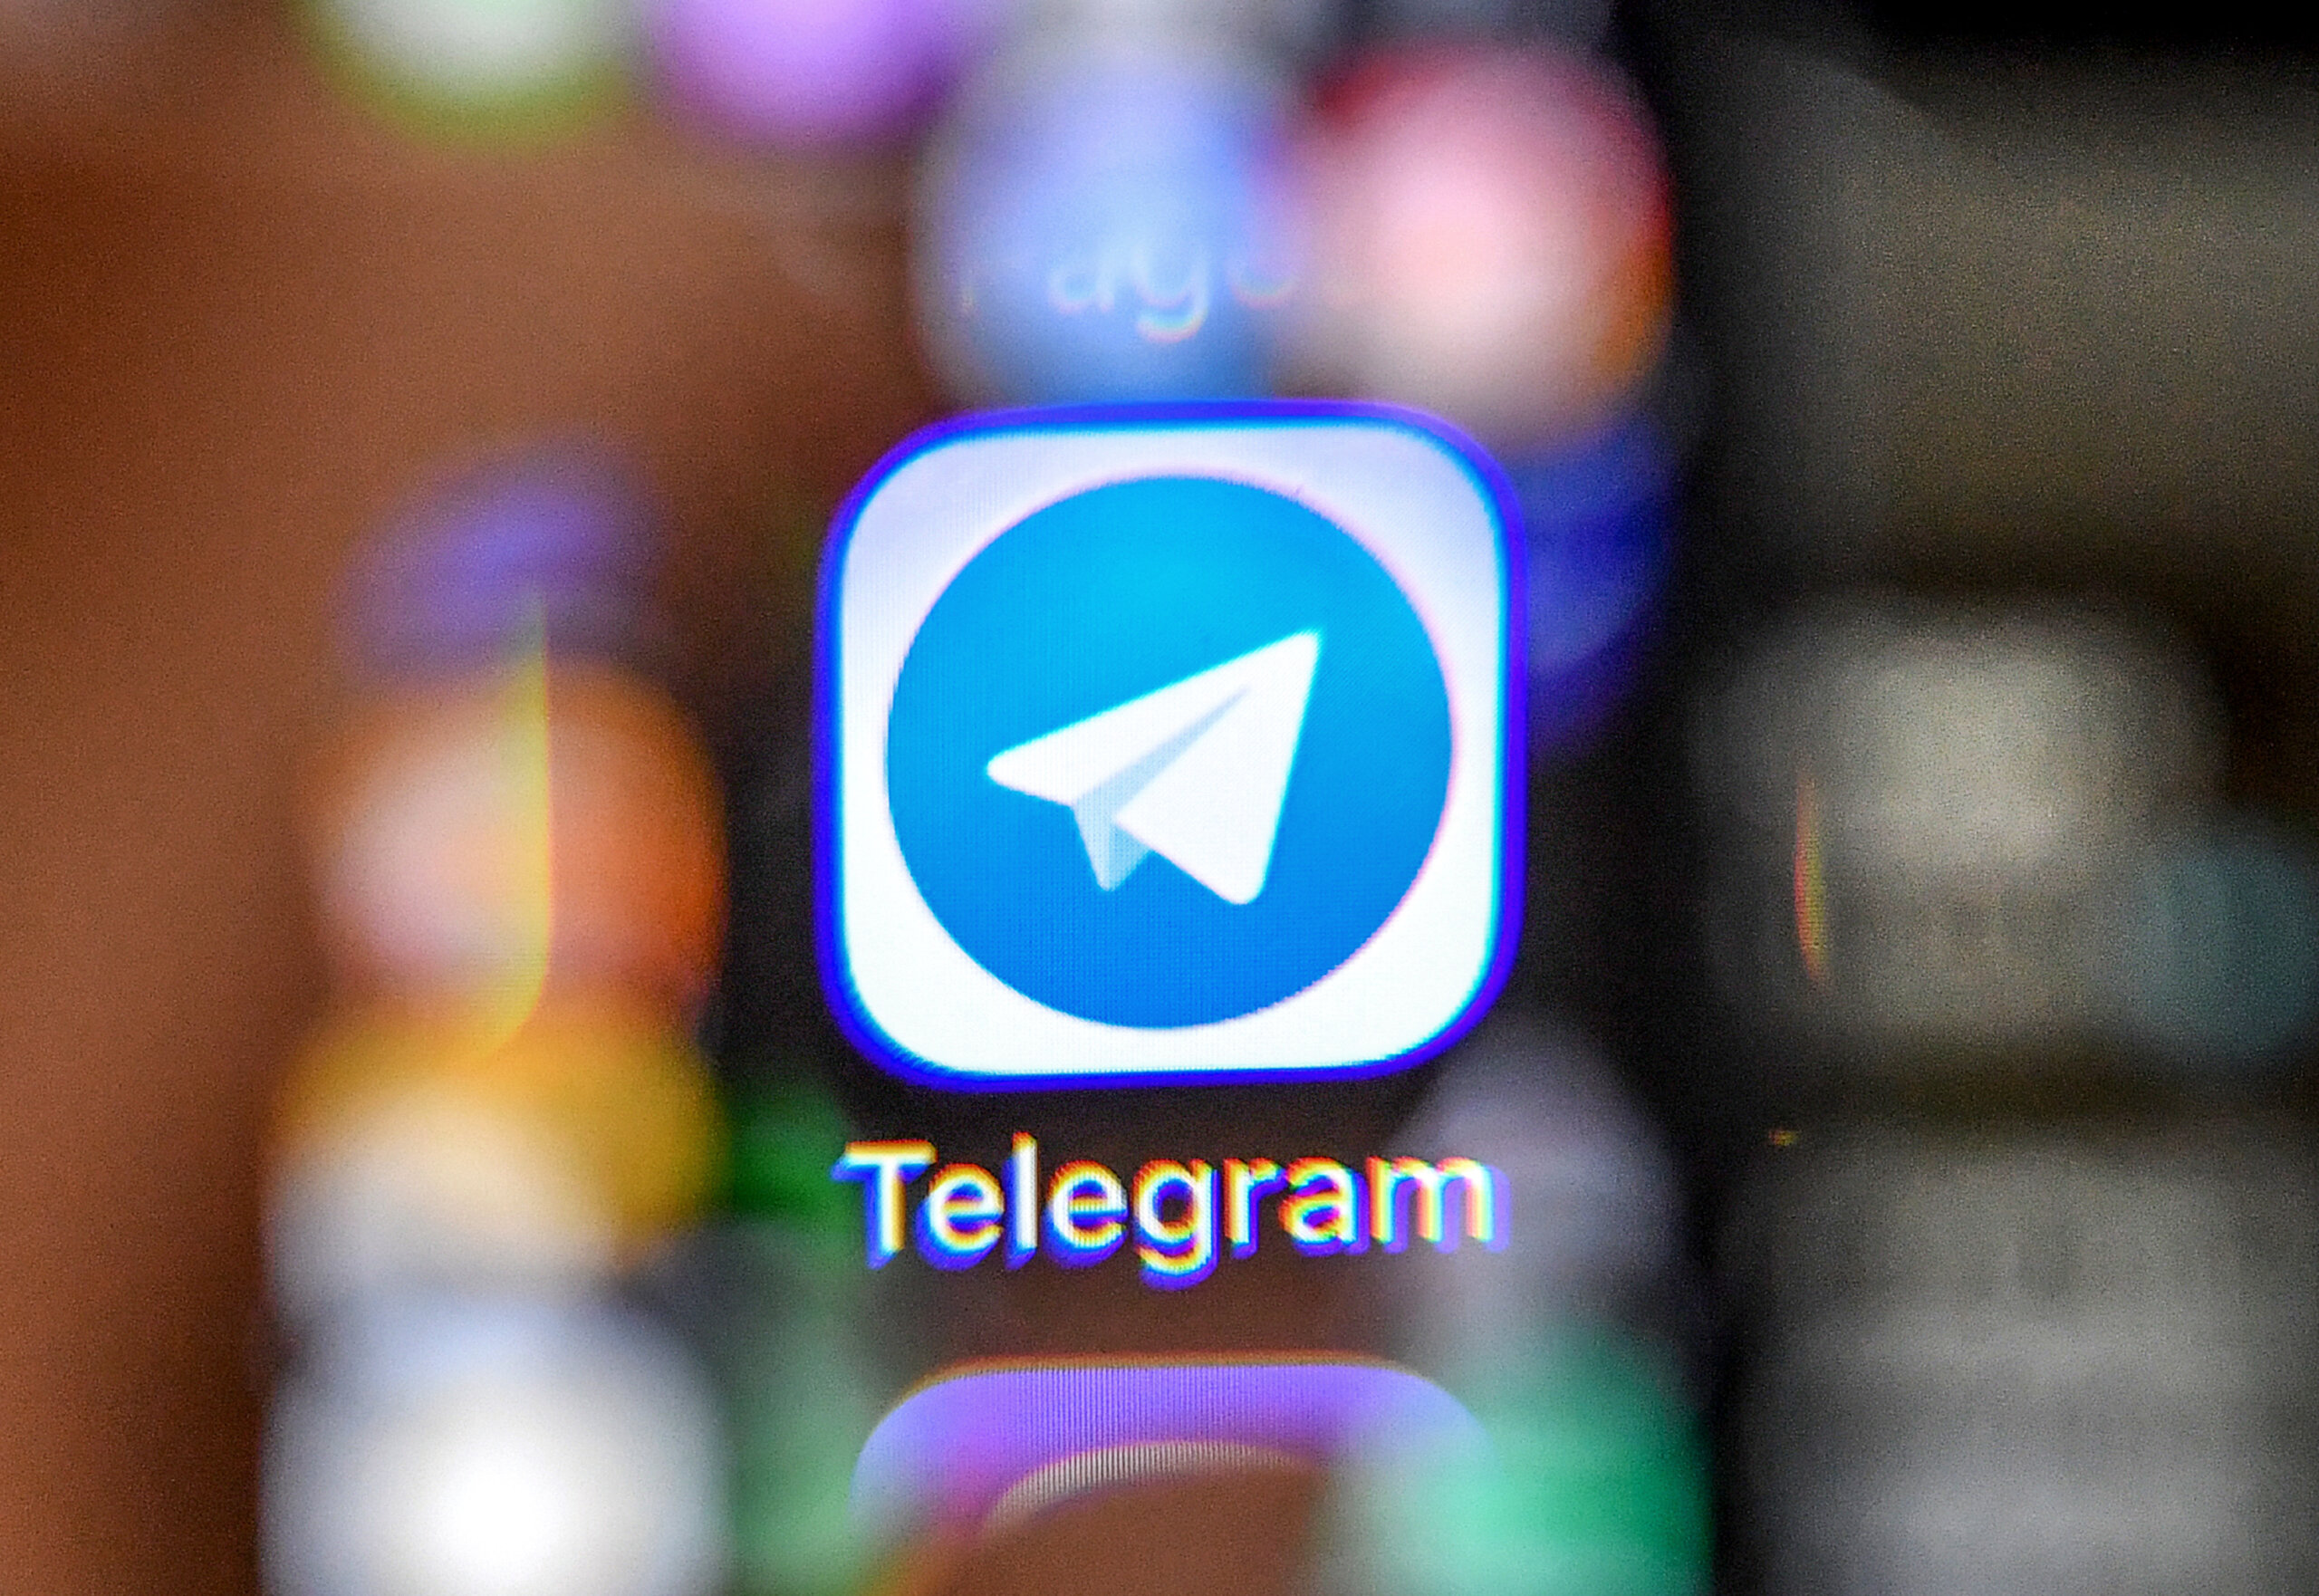 Telegram is turning into hackers’ hotspots. Here’s why